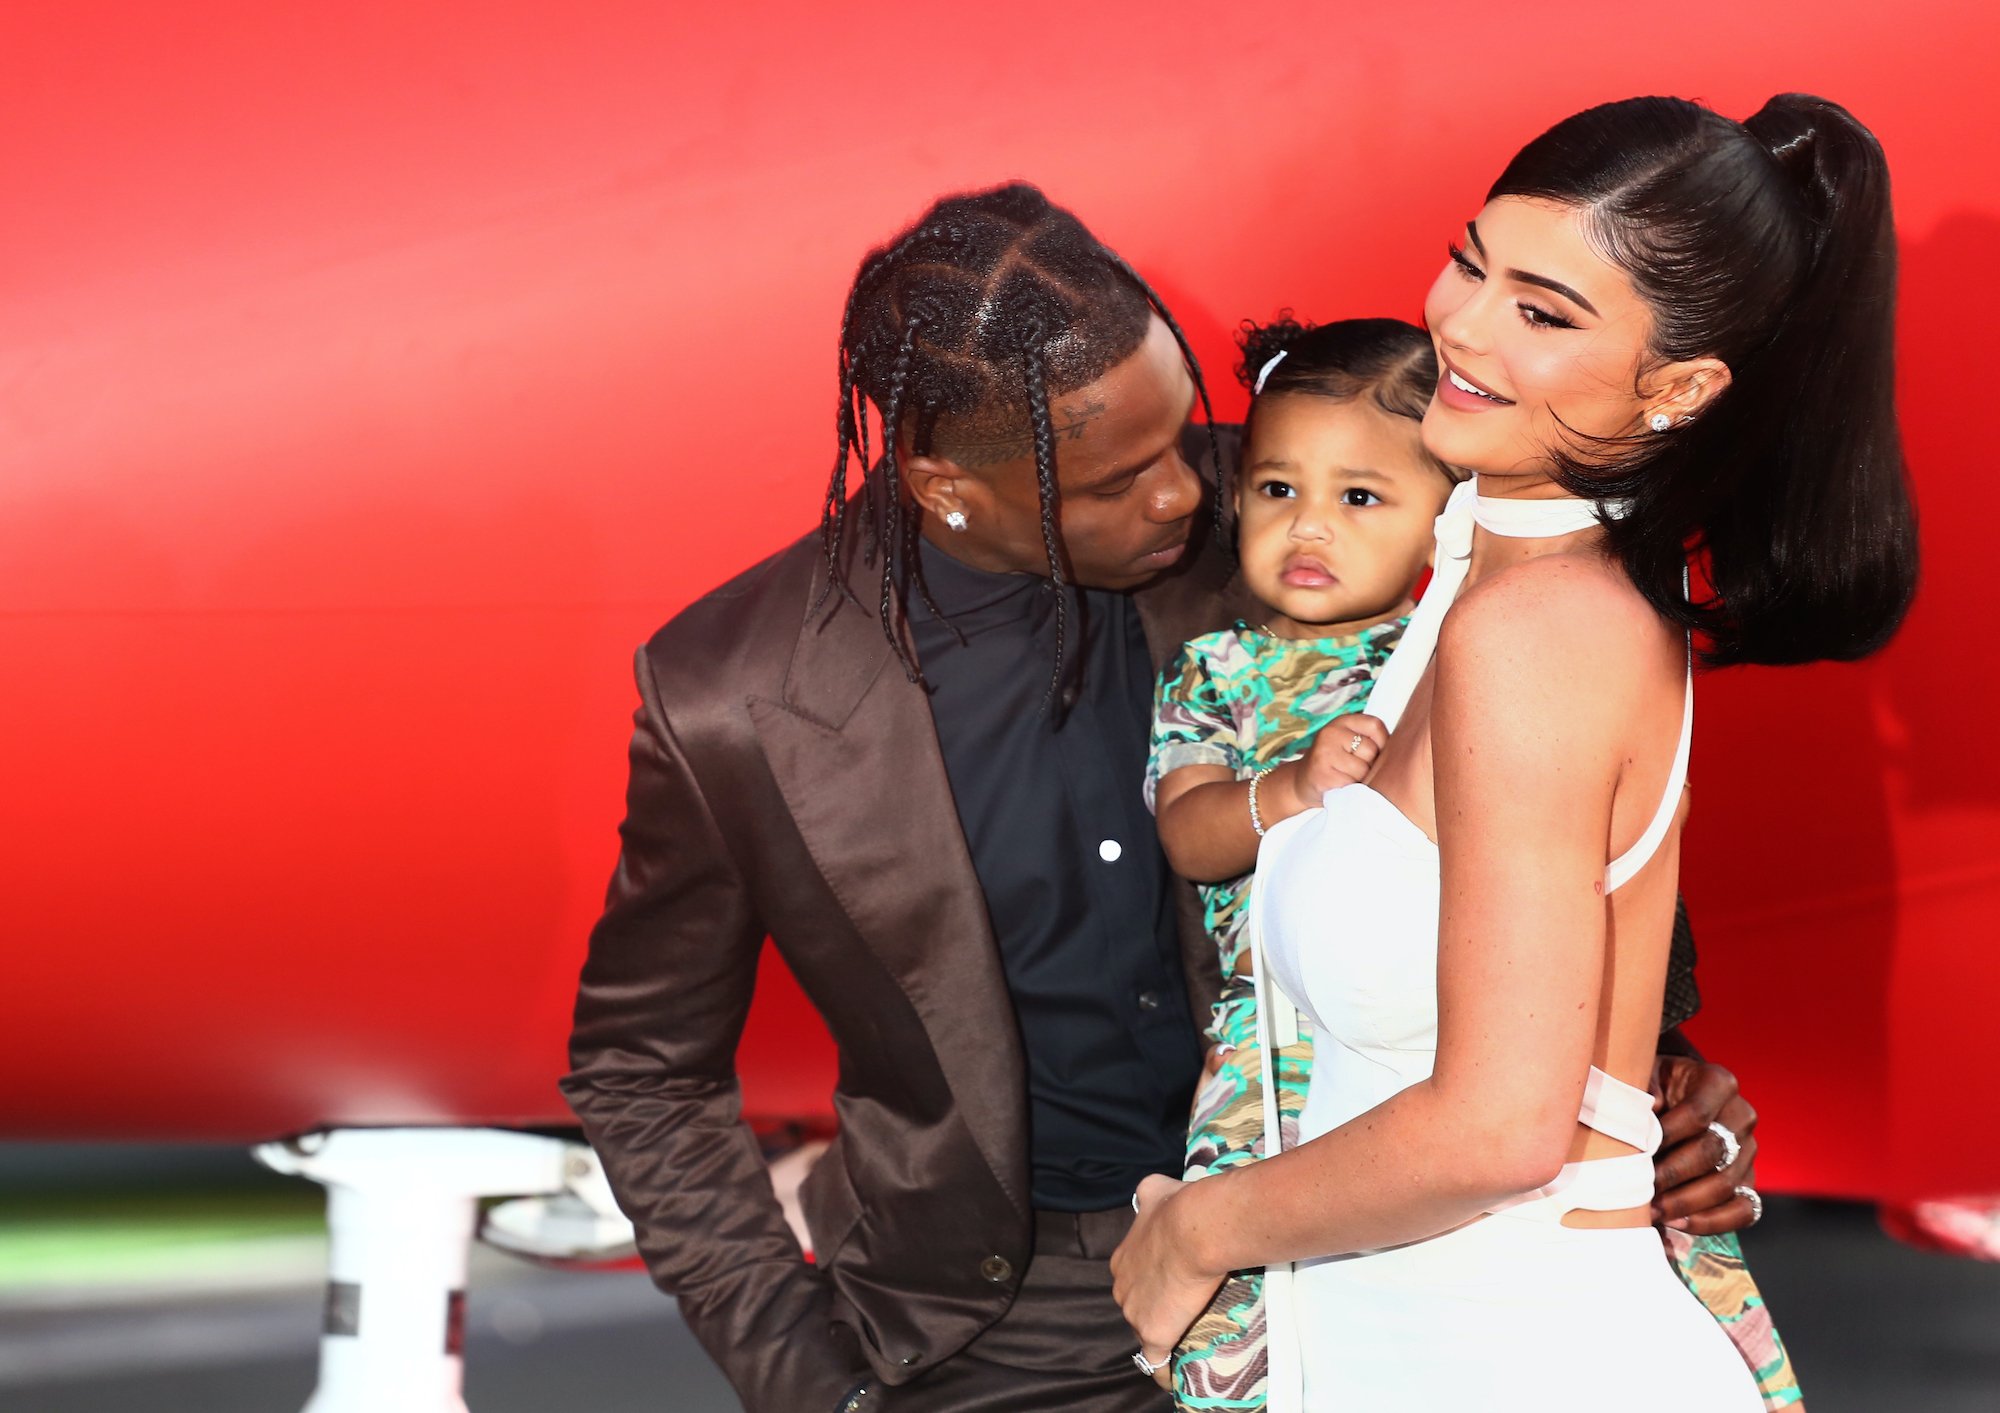 ‘KUWTK’: Kylie and Travis’ Will They/Won’t They Shenanigans Are Getting ‘Old,’ Fans Complain